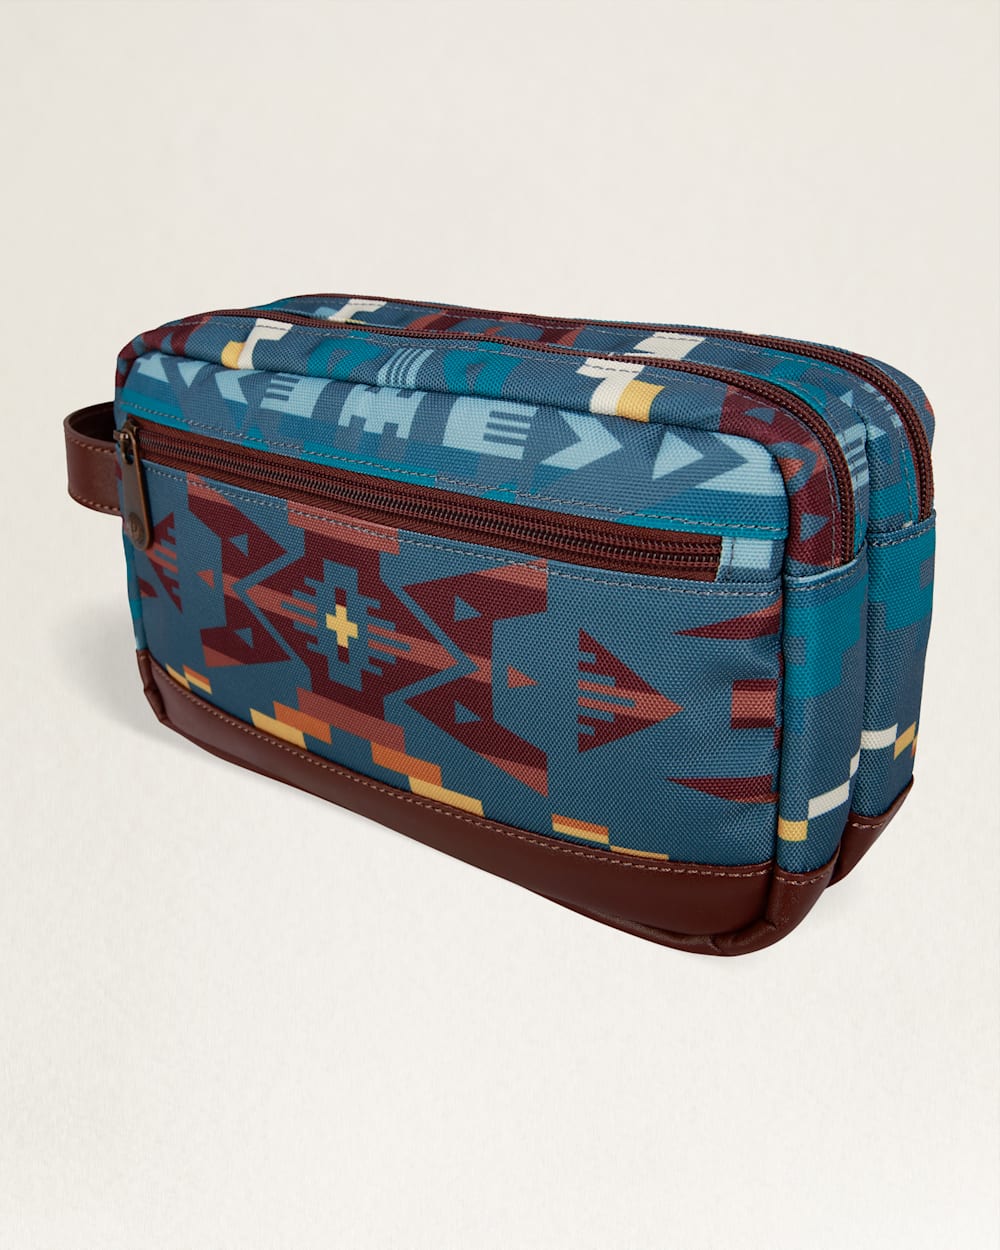 ALTERNATE VIEW OF CARICO LAKE TOILETRY KIT IN BLUE image number 2